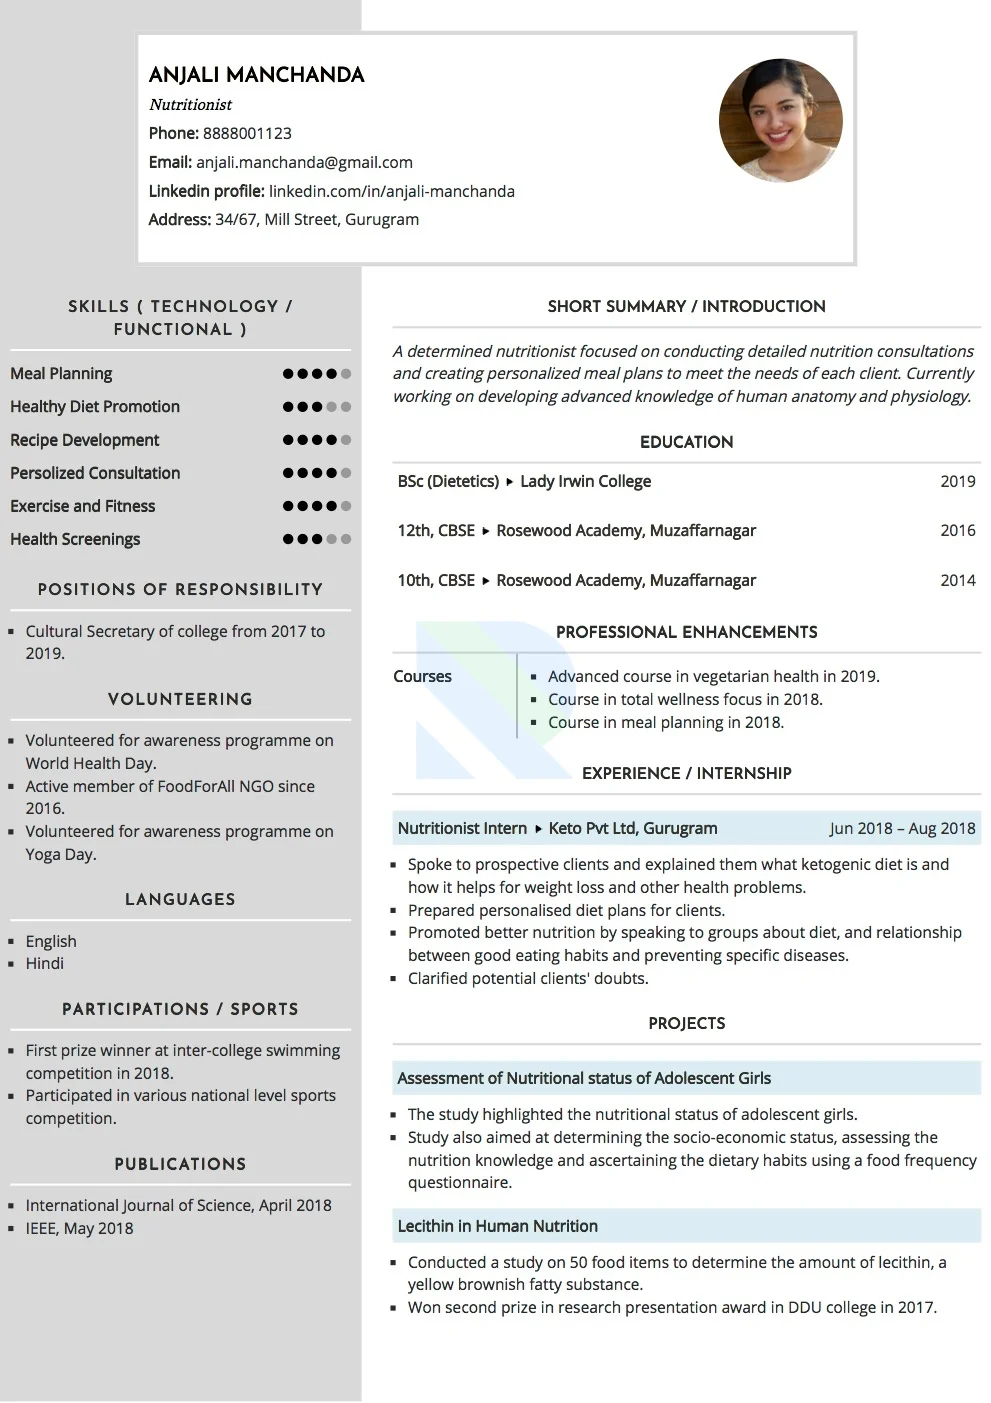 Sample Resume of Nutritionist  | Free Resume Templates & Samples on Resumod.co